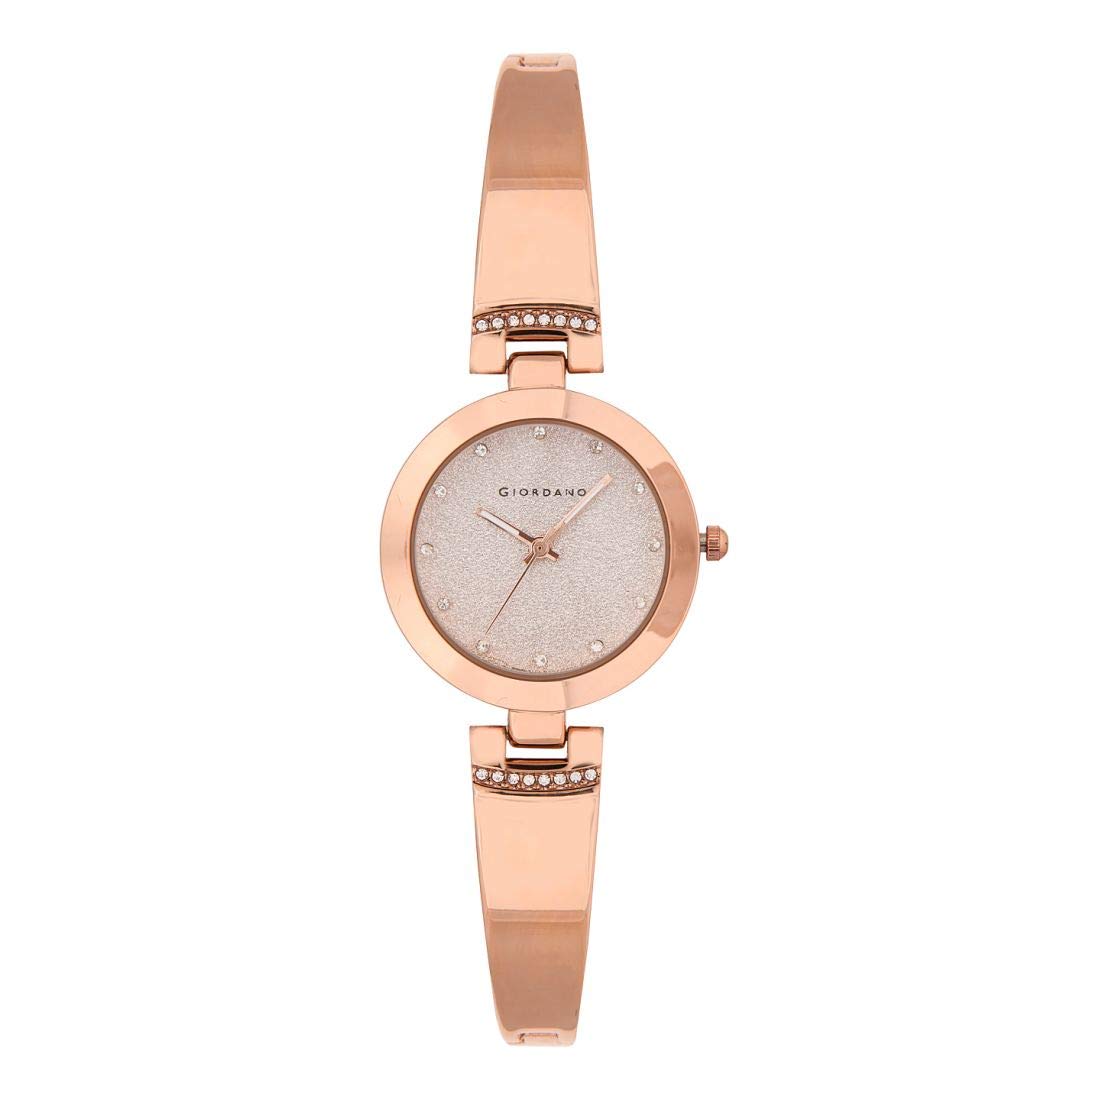 Giordano Analog Silver Dial Women's Watch Price in India